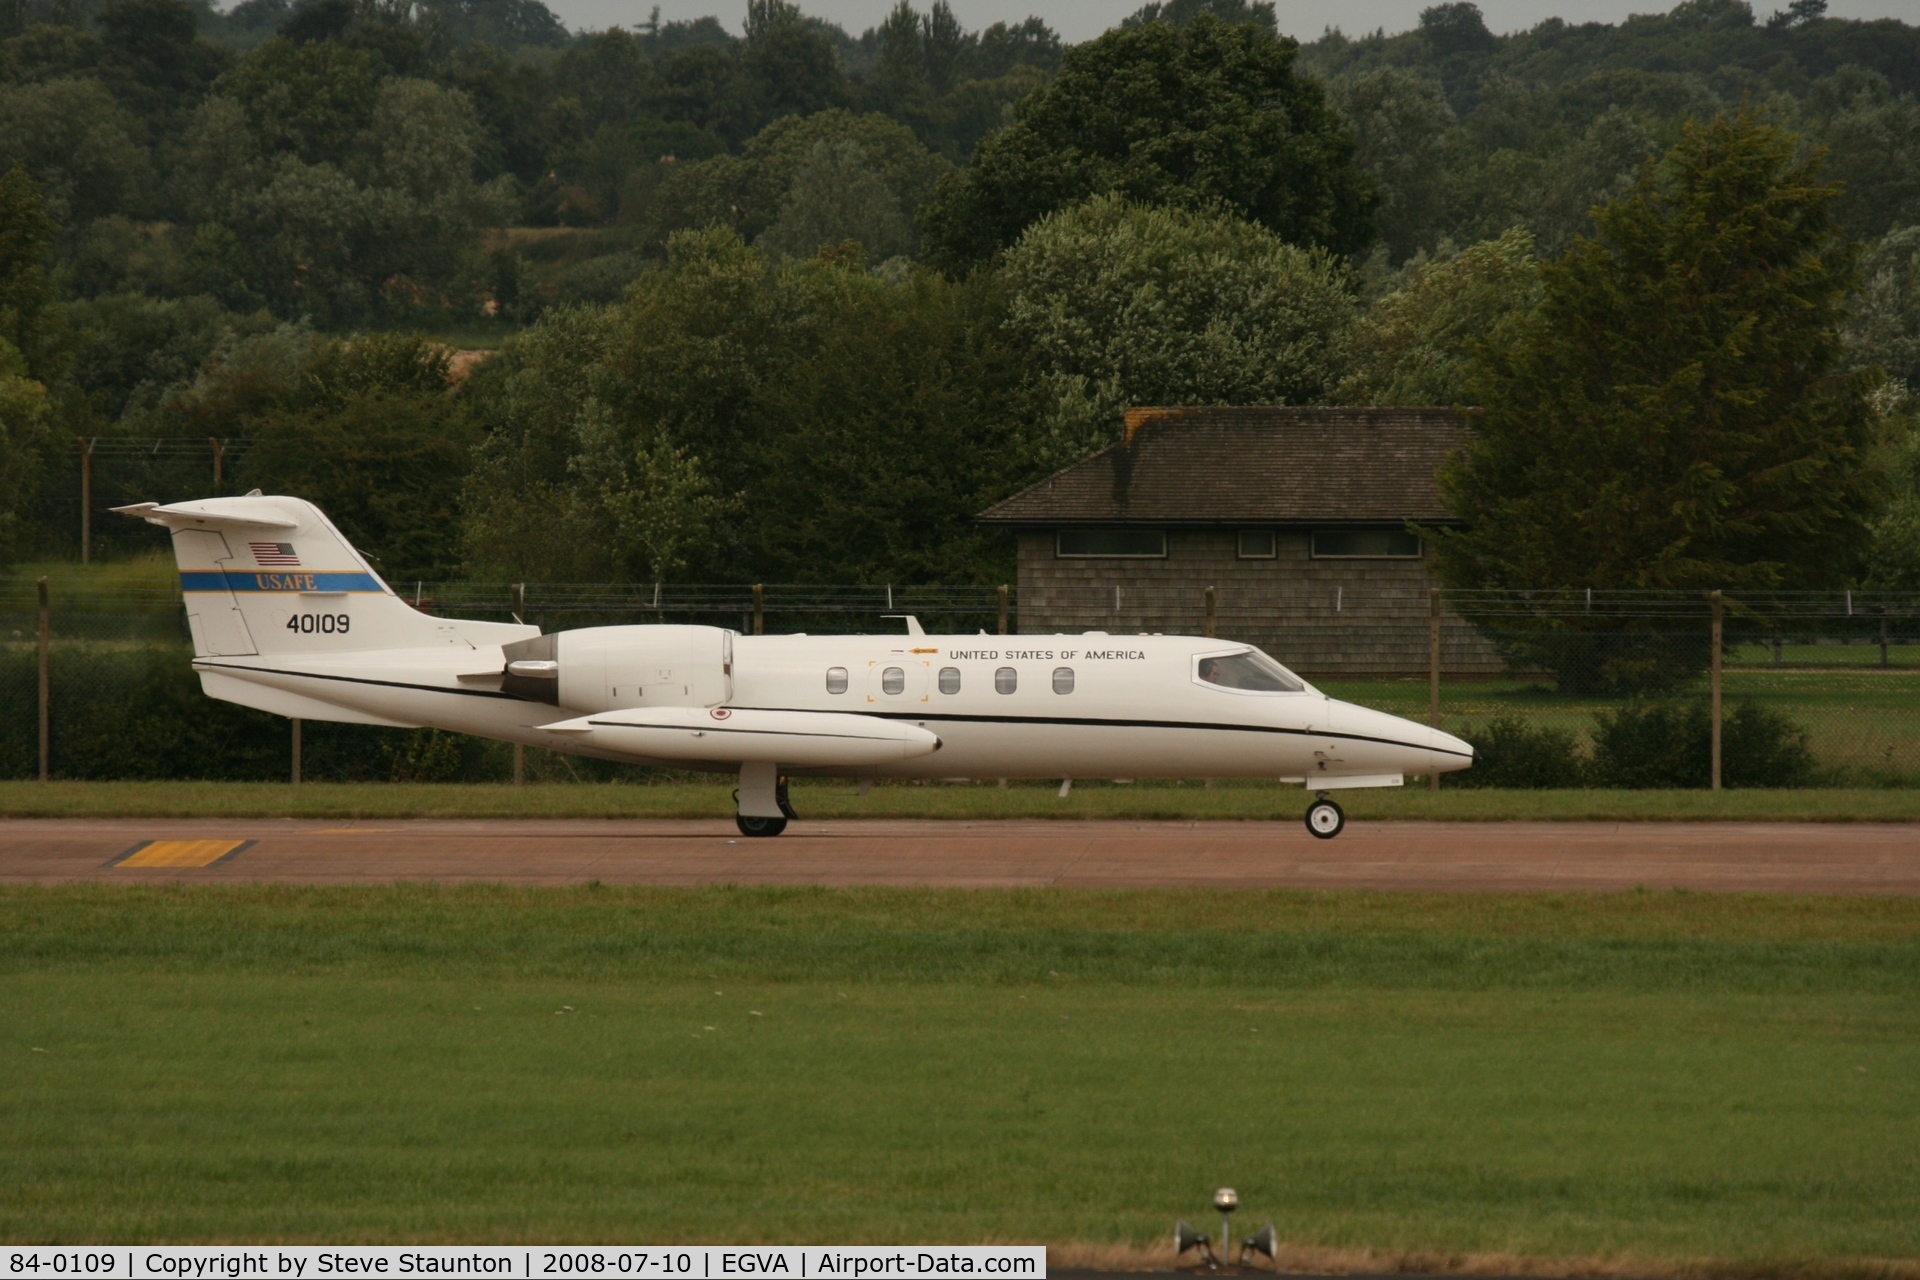 84-0109, 1984 Gates Learjet C-21A C/N 35A-555, Taken at the Royal International Air Tattoo 2008 during arrivals and departures (show days cancelled due to bad weather)